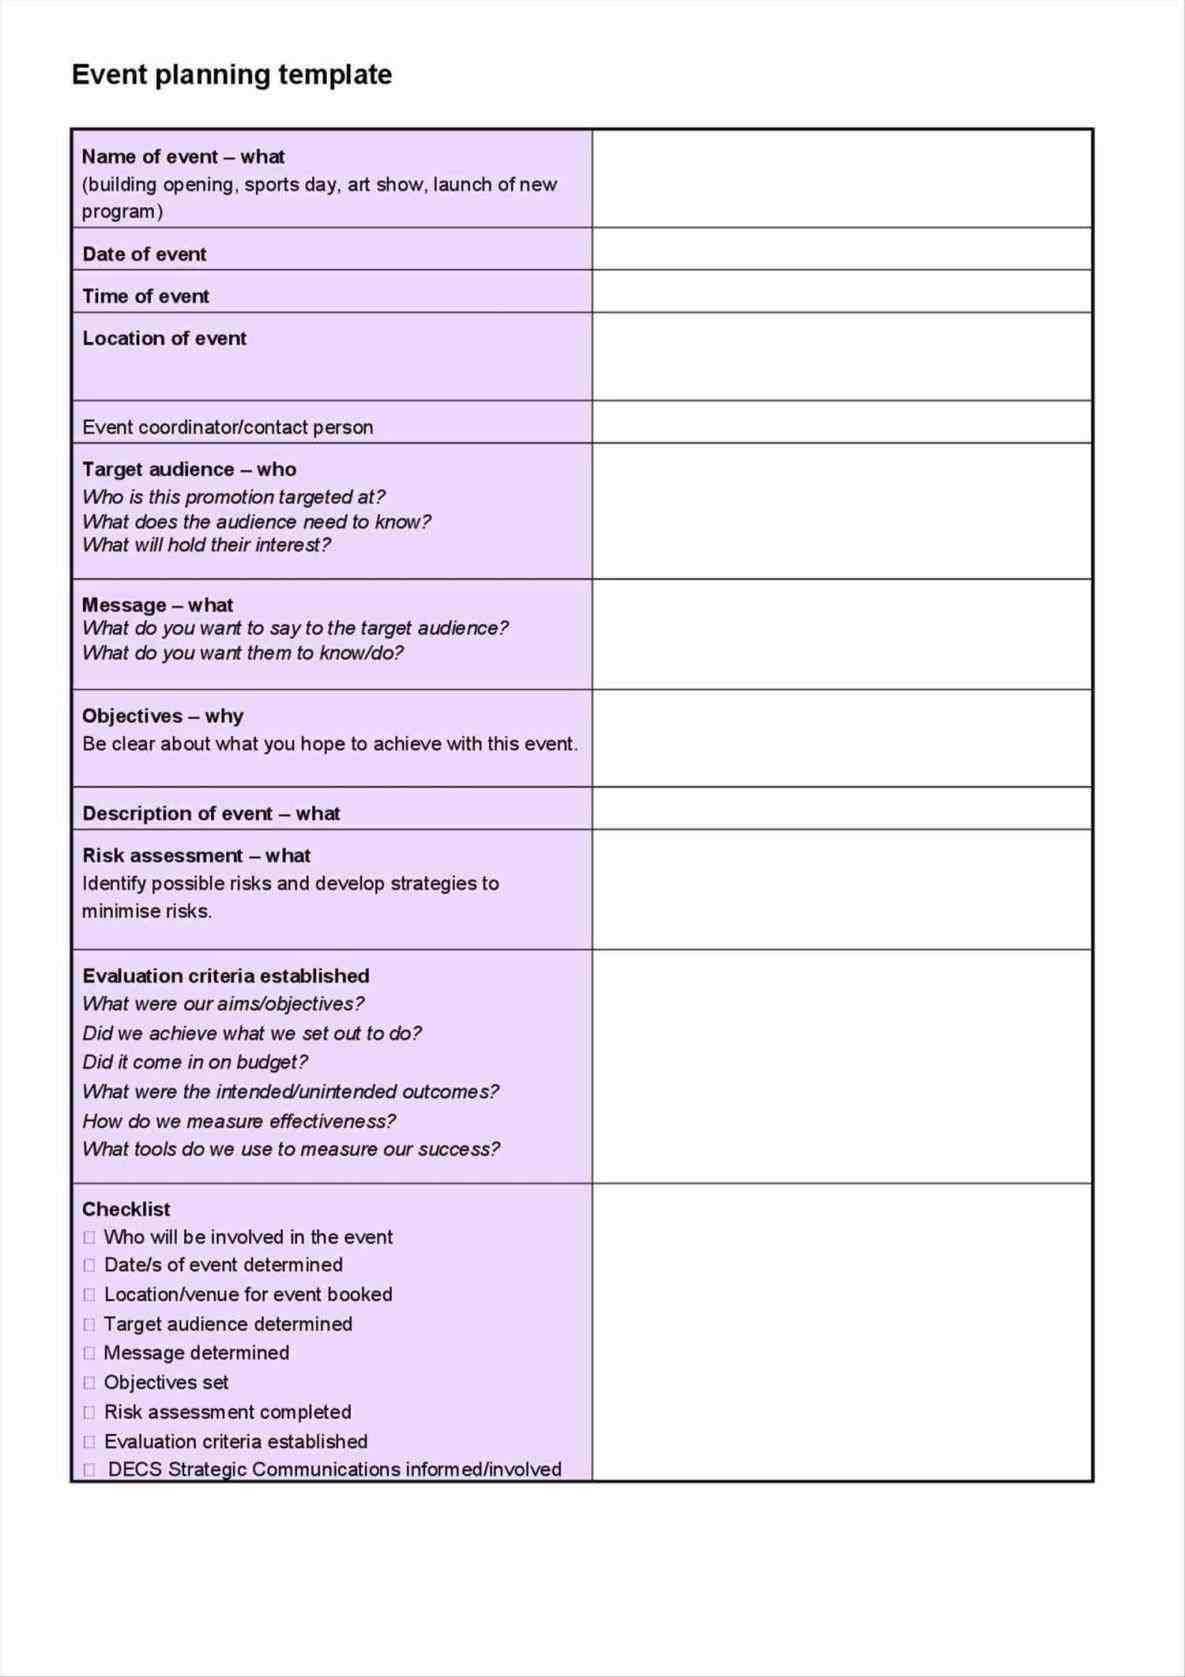 Career Research Worksheet Also College Students who Do assignments for Pay